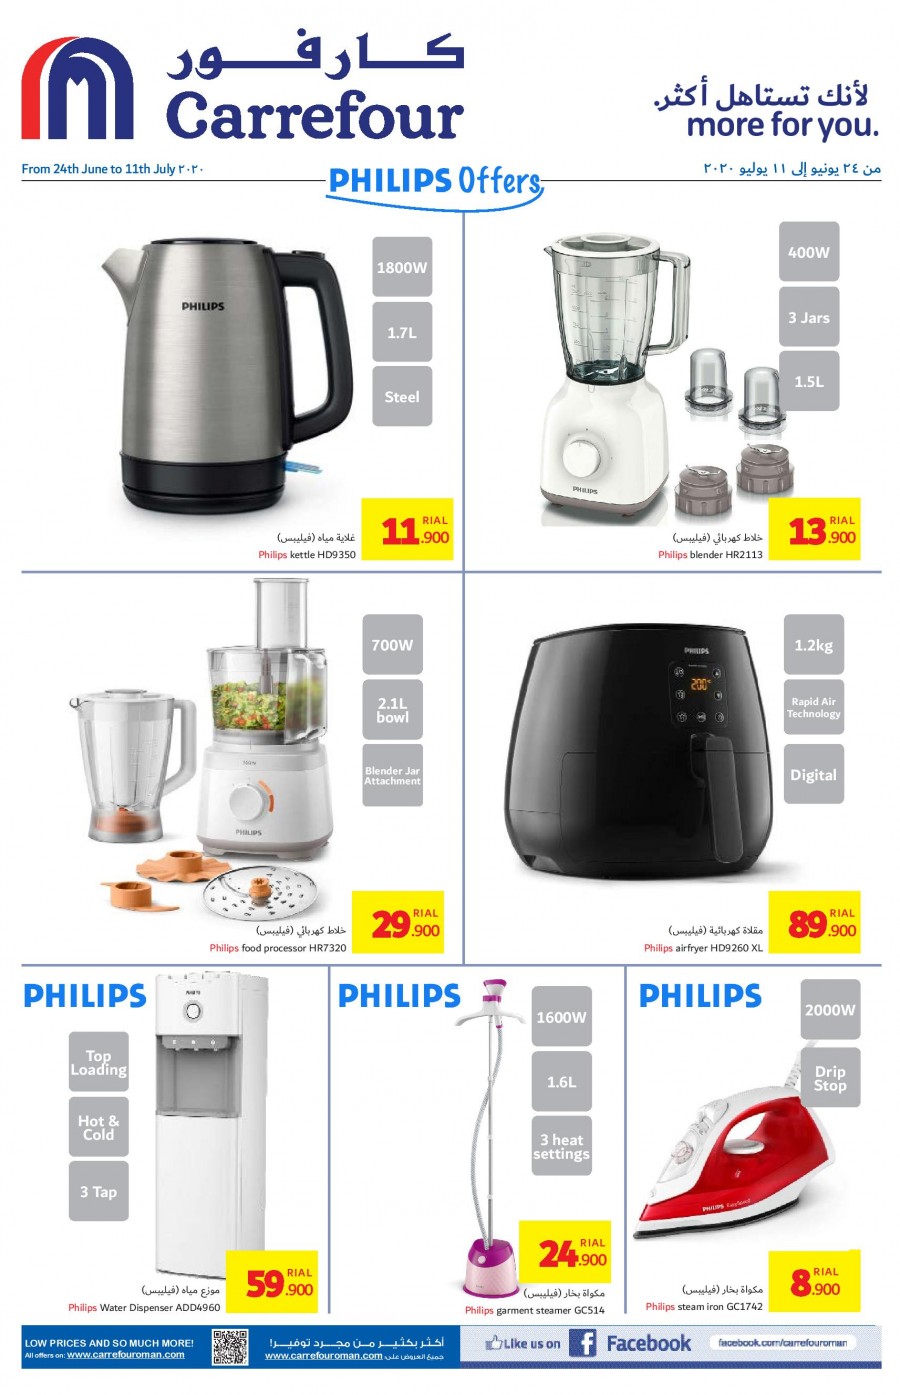 Carrefour Hypermarket Philips Offers